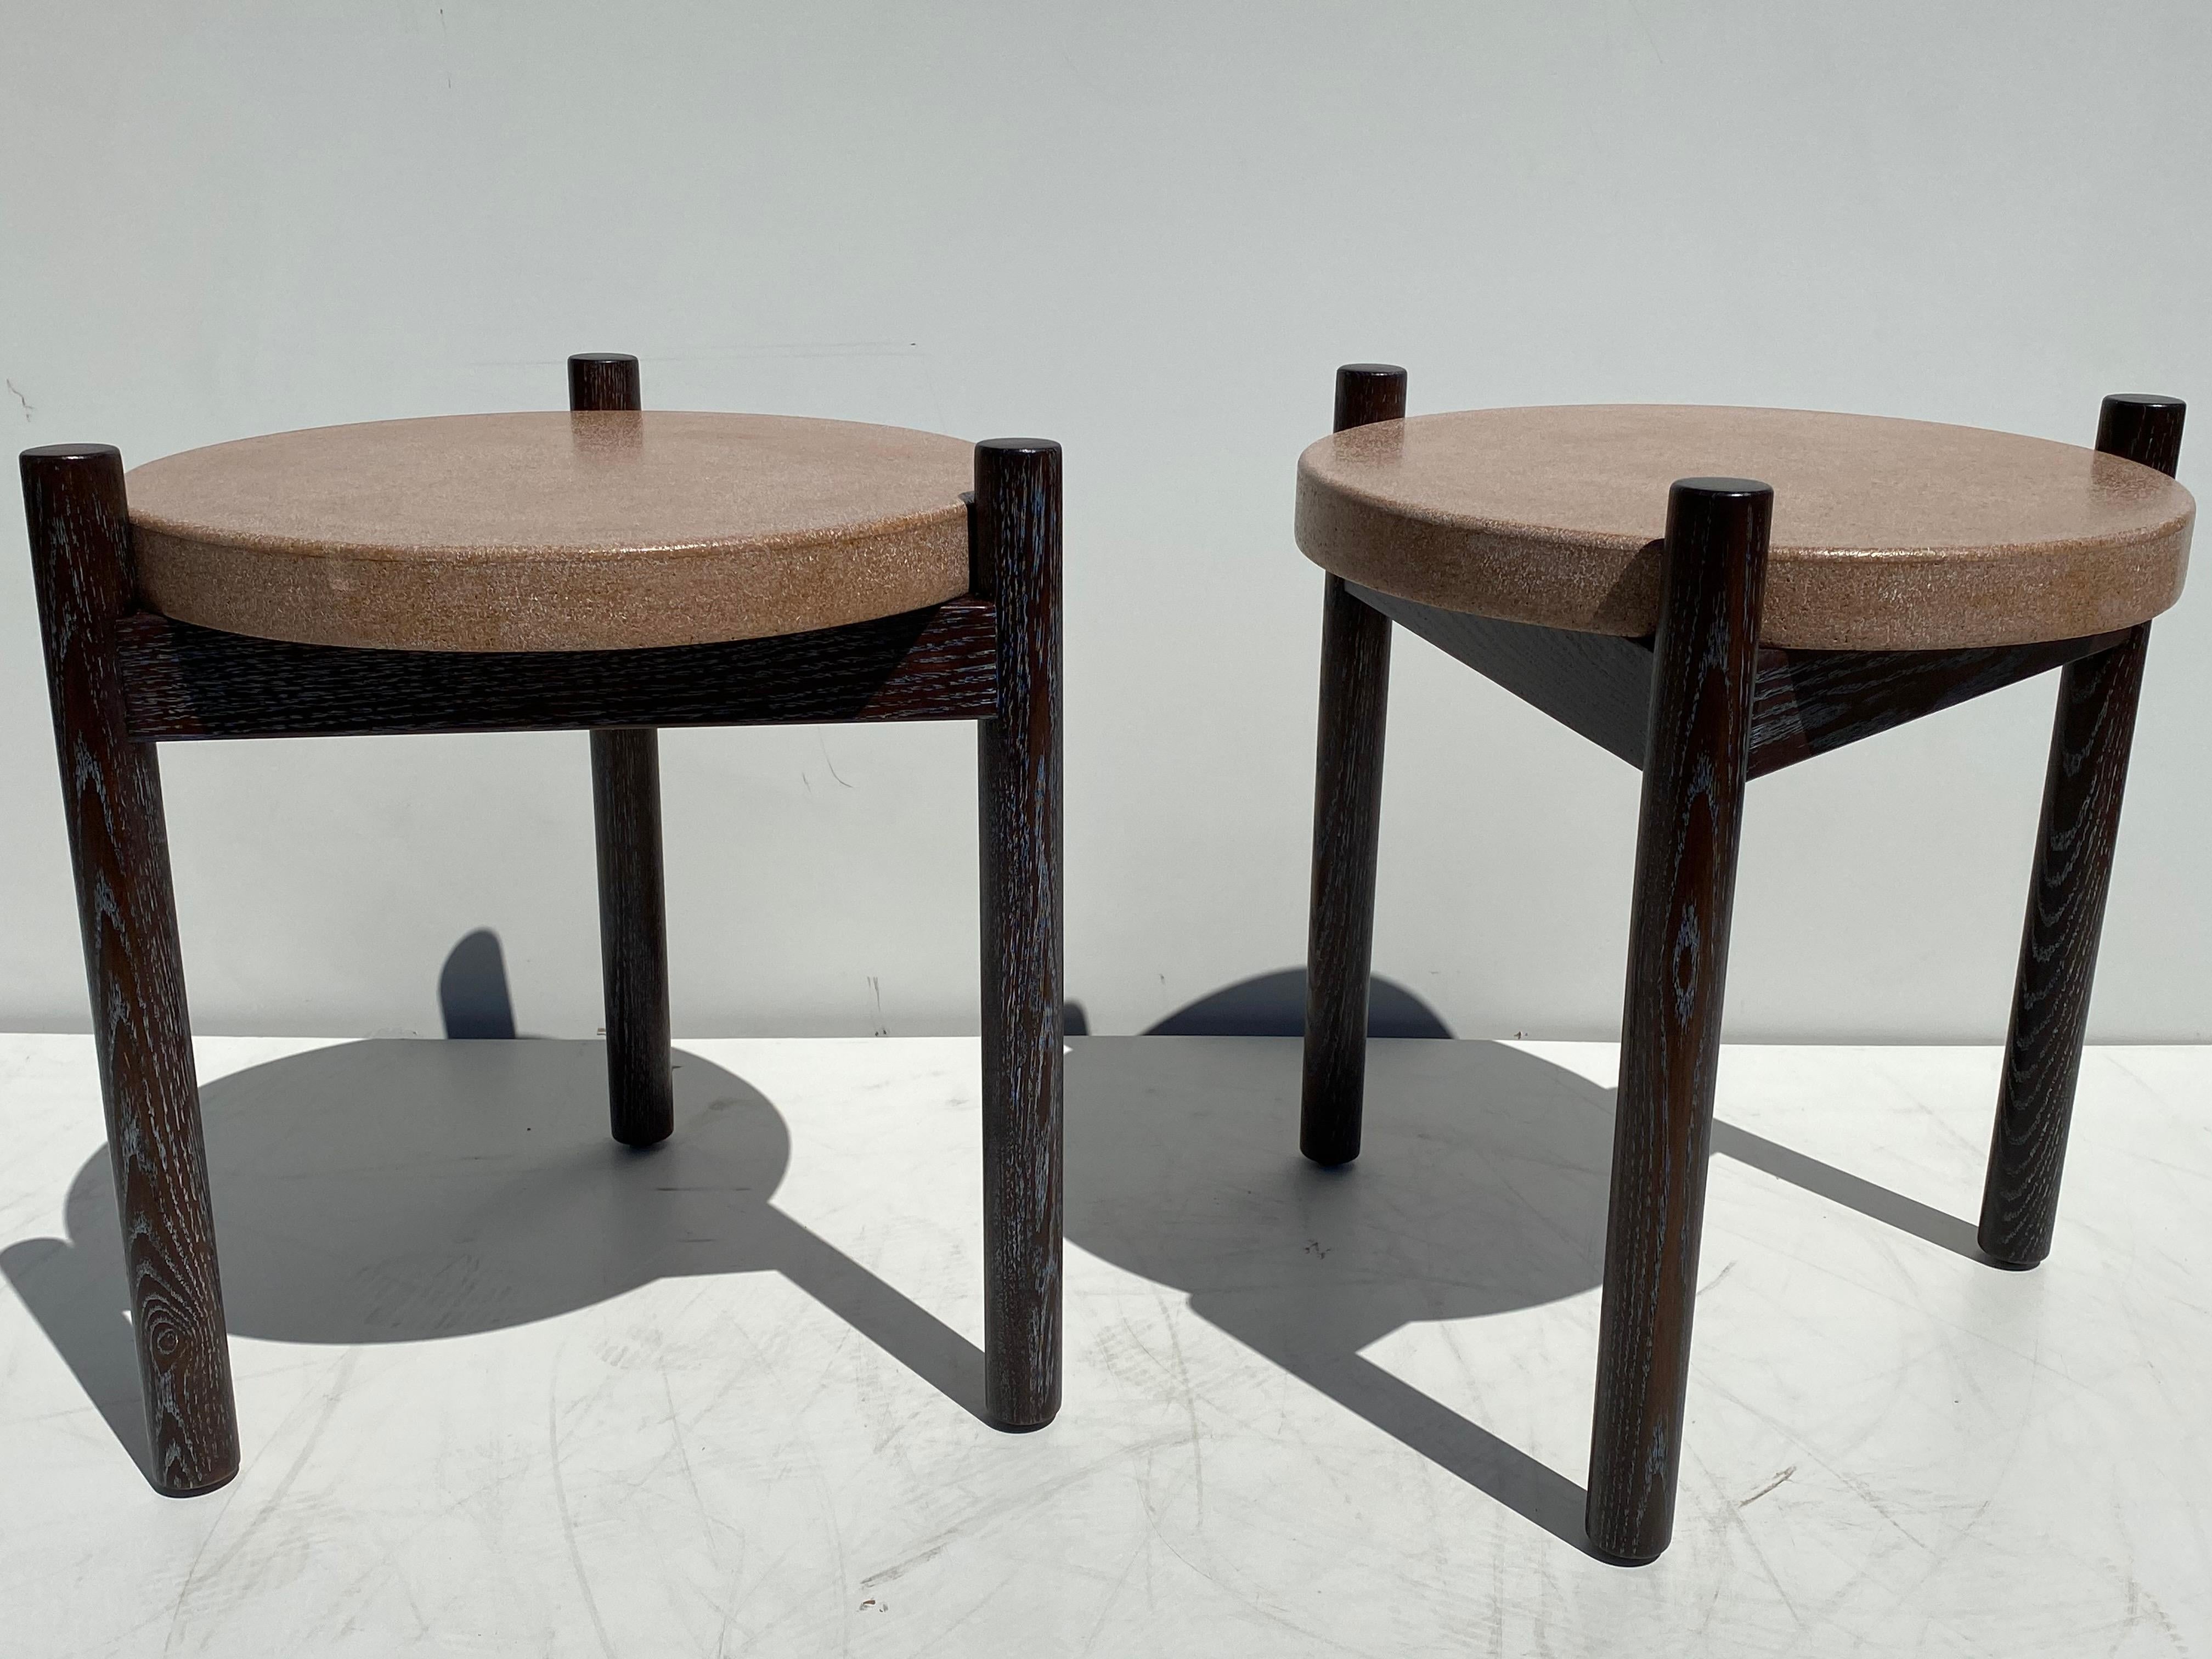 Pair of midcentury inspired cerused oak and cork side tables.